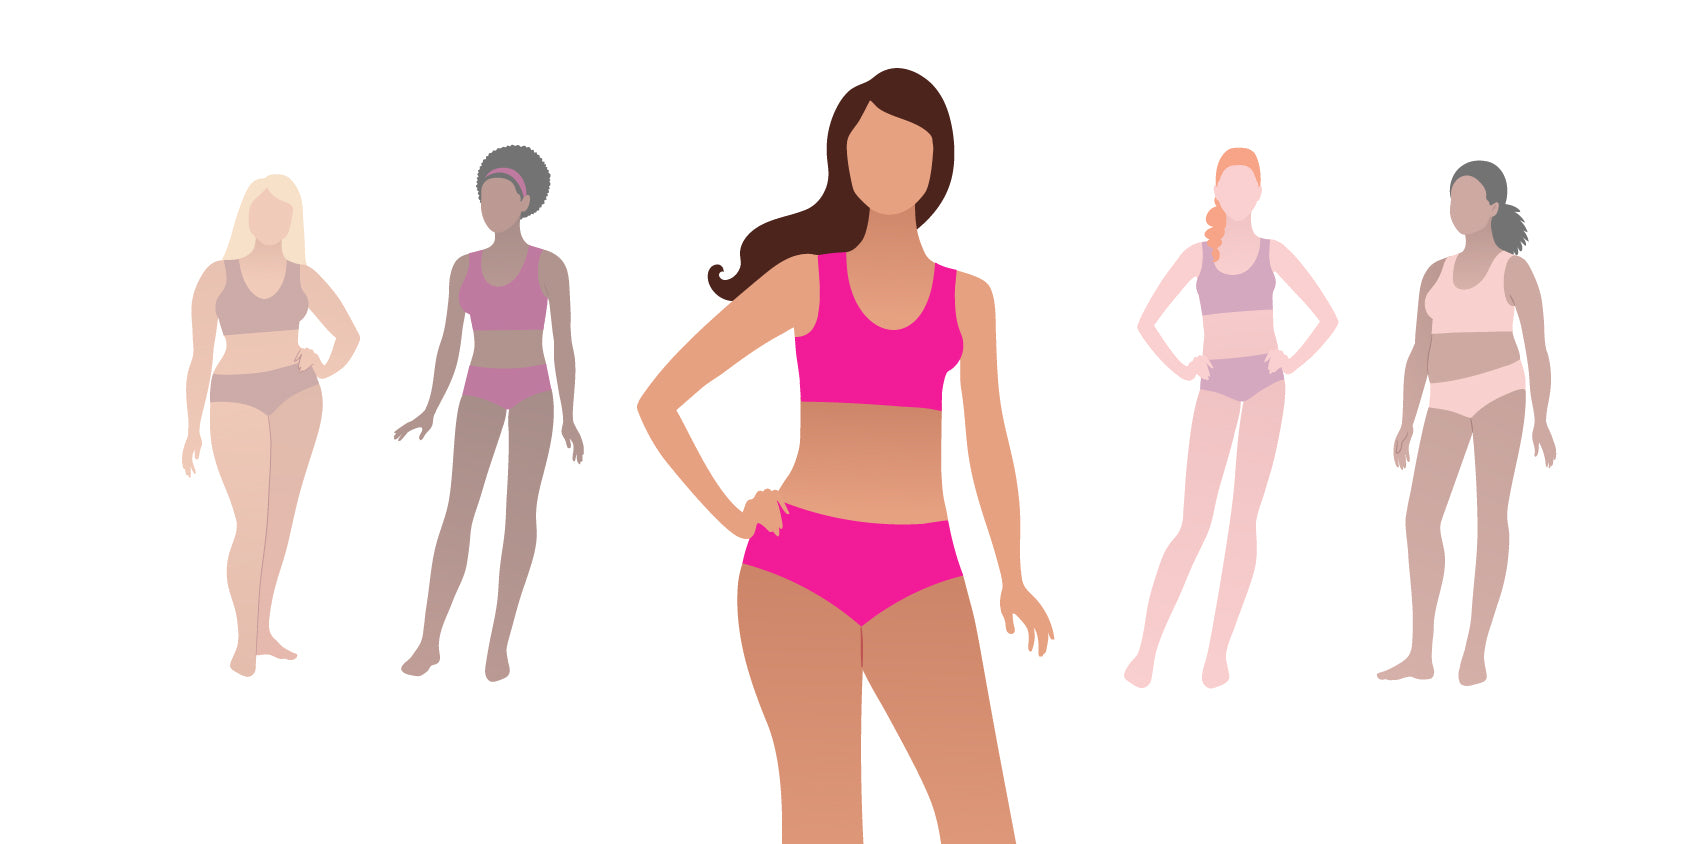 How to dress for the spoon body shape-the ultimate guide (part one